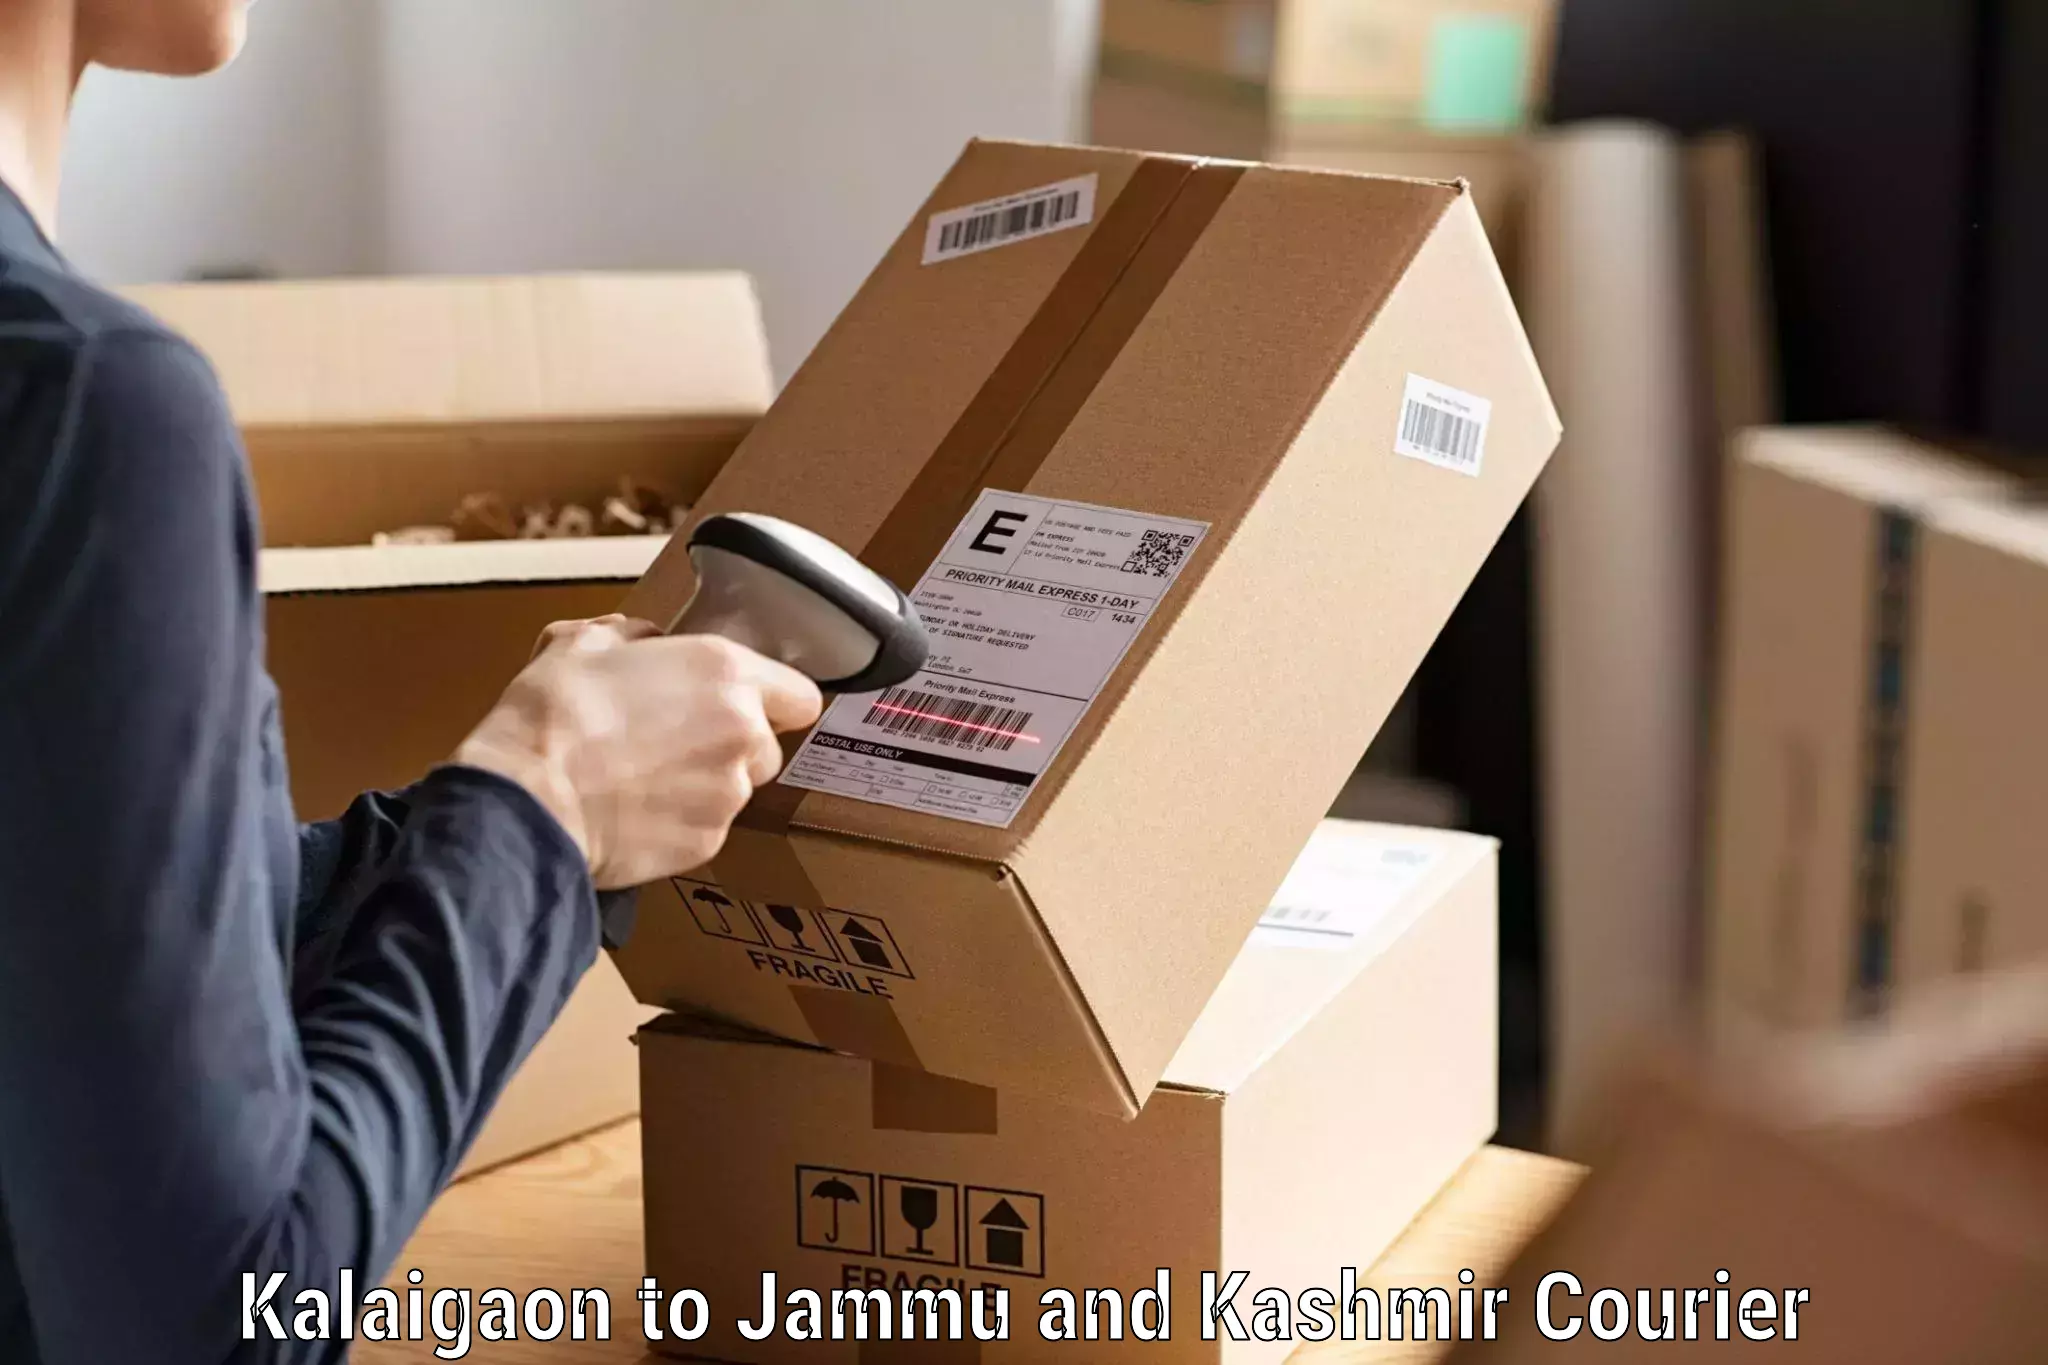 Courier rate comparison in Kalaigaon to Jammu and Kashmir